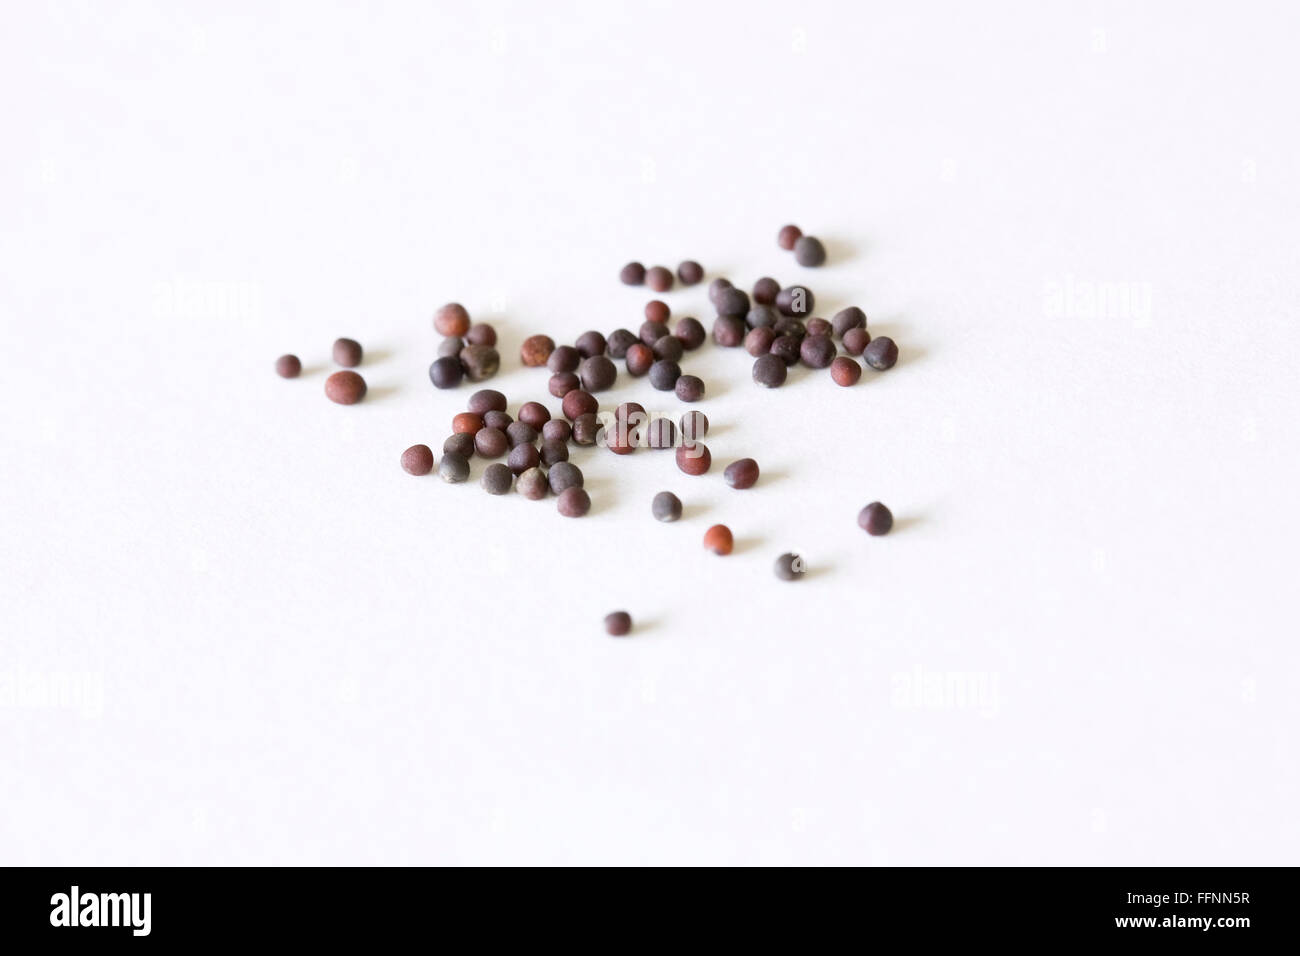 Brassica rapa seeds. Turnip seeds on a white background. Stock Photo